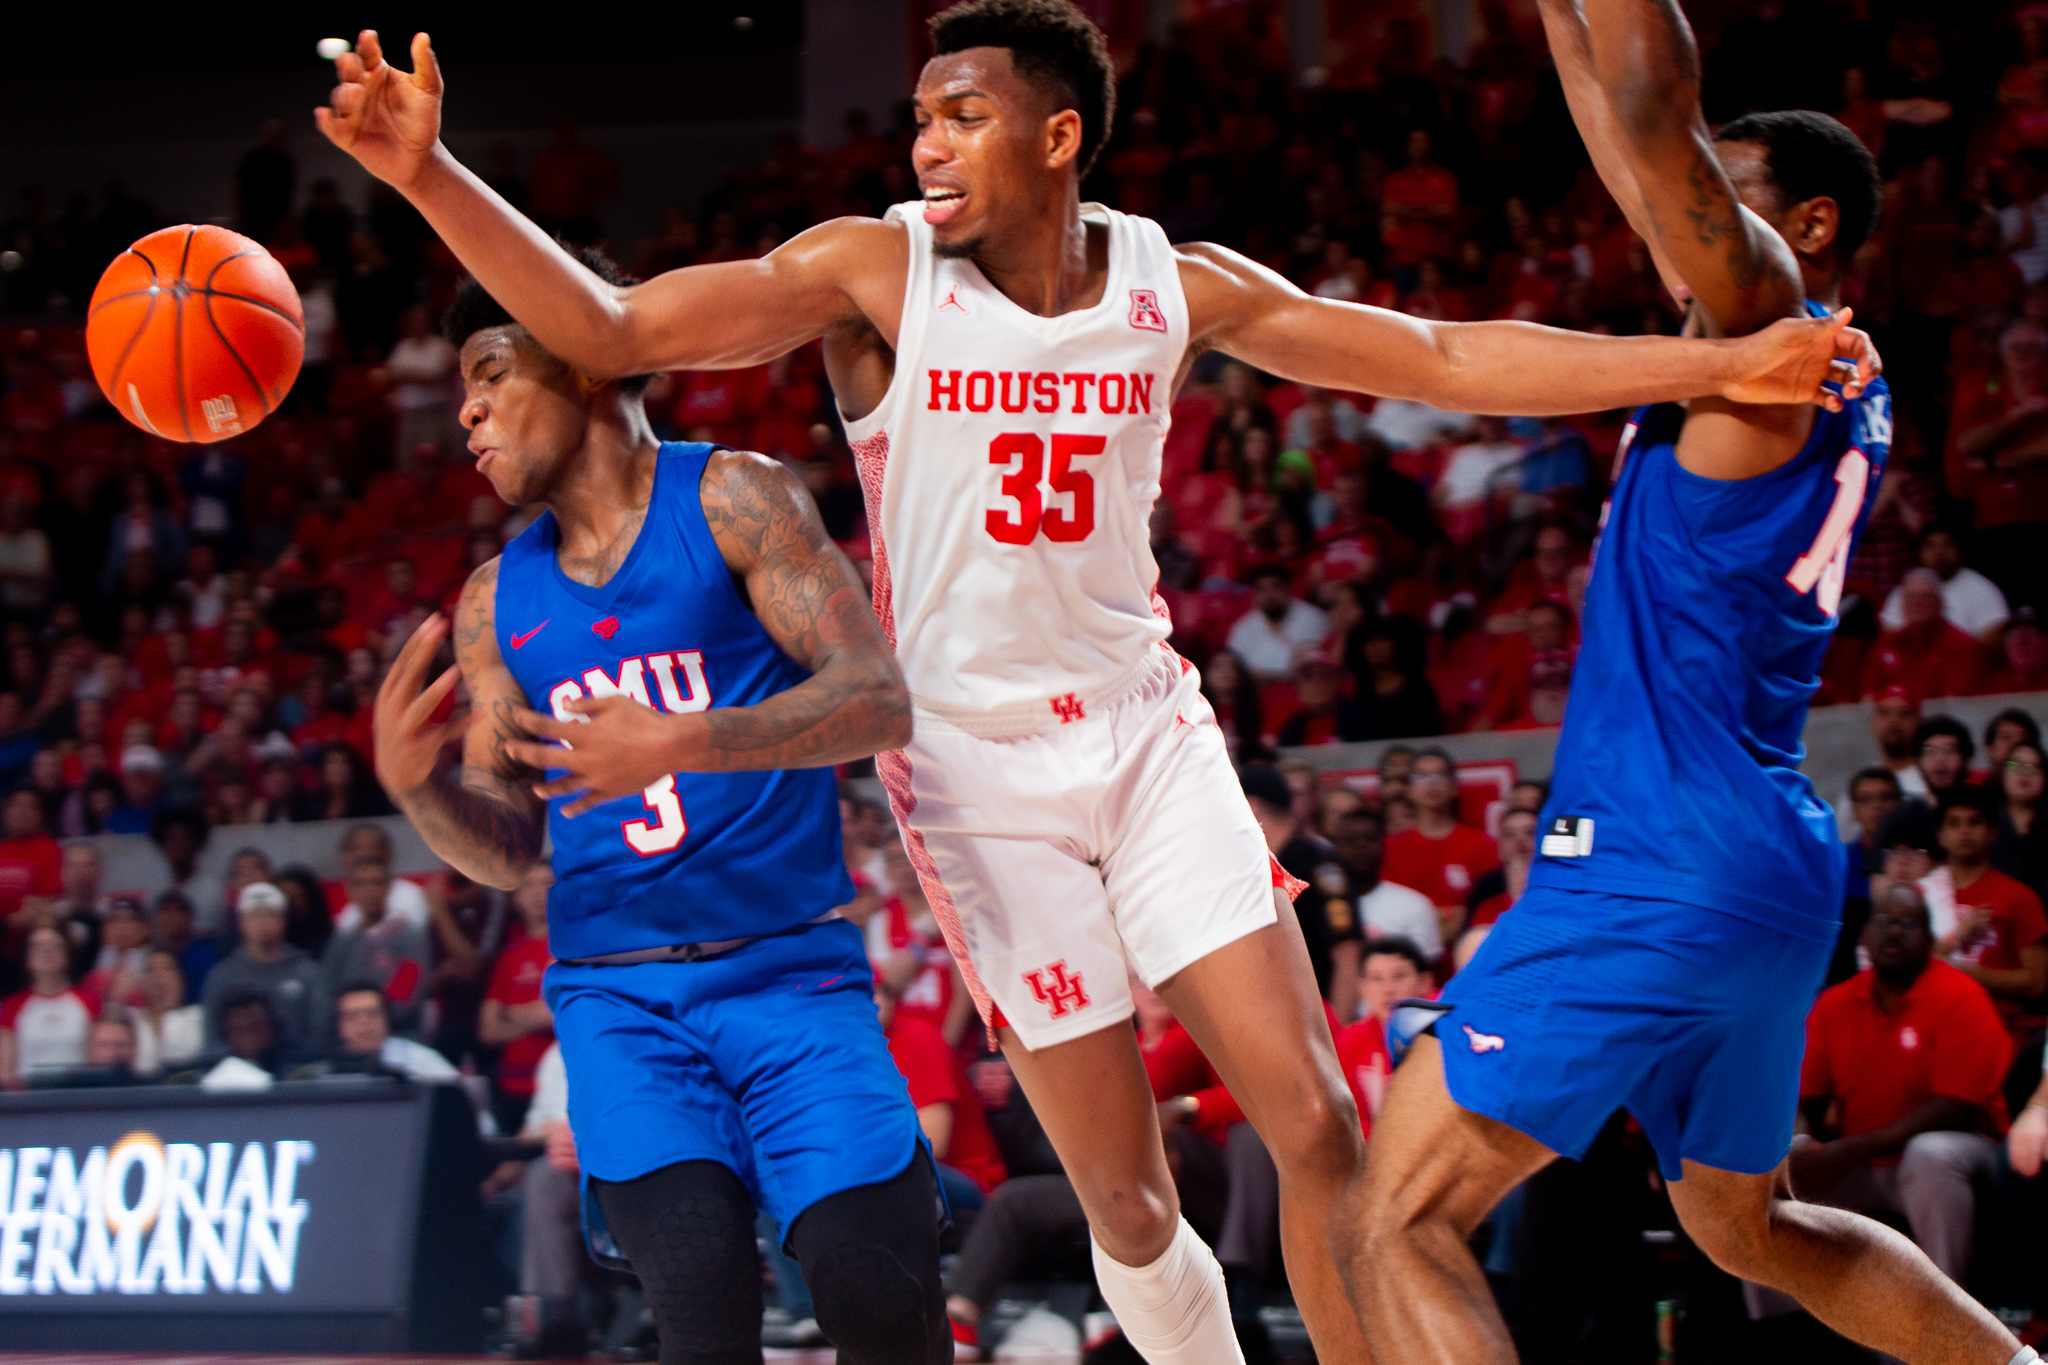 Head coach Kelvin Sampson said Fabian White was Houston's best player in its 71-62 win over SMU. | Jiselle Santos/The Cougar